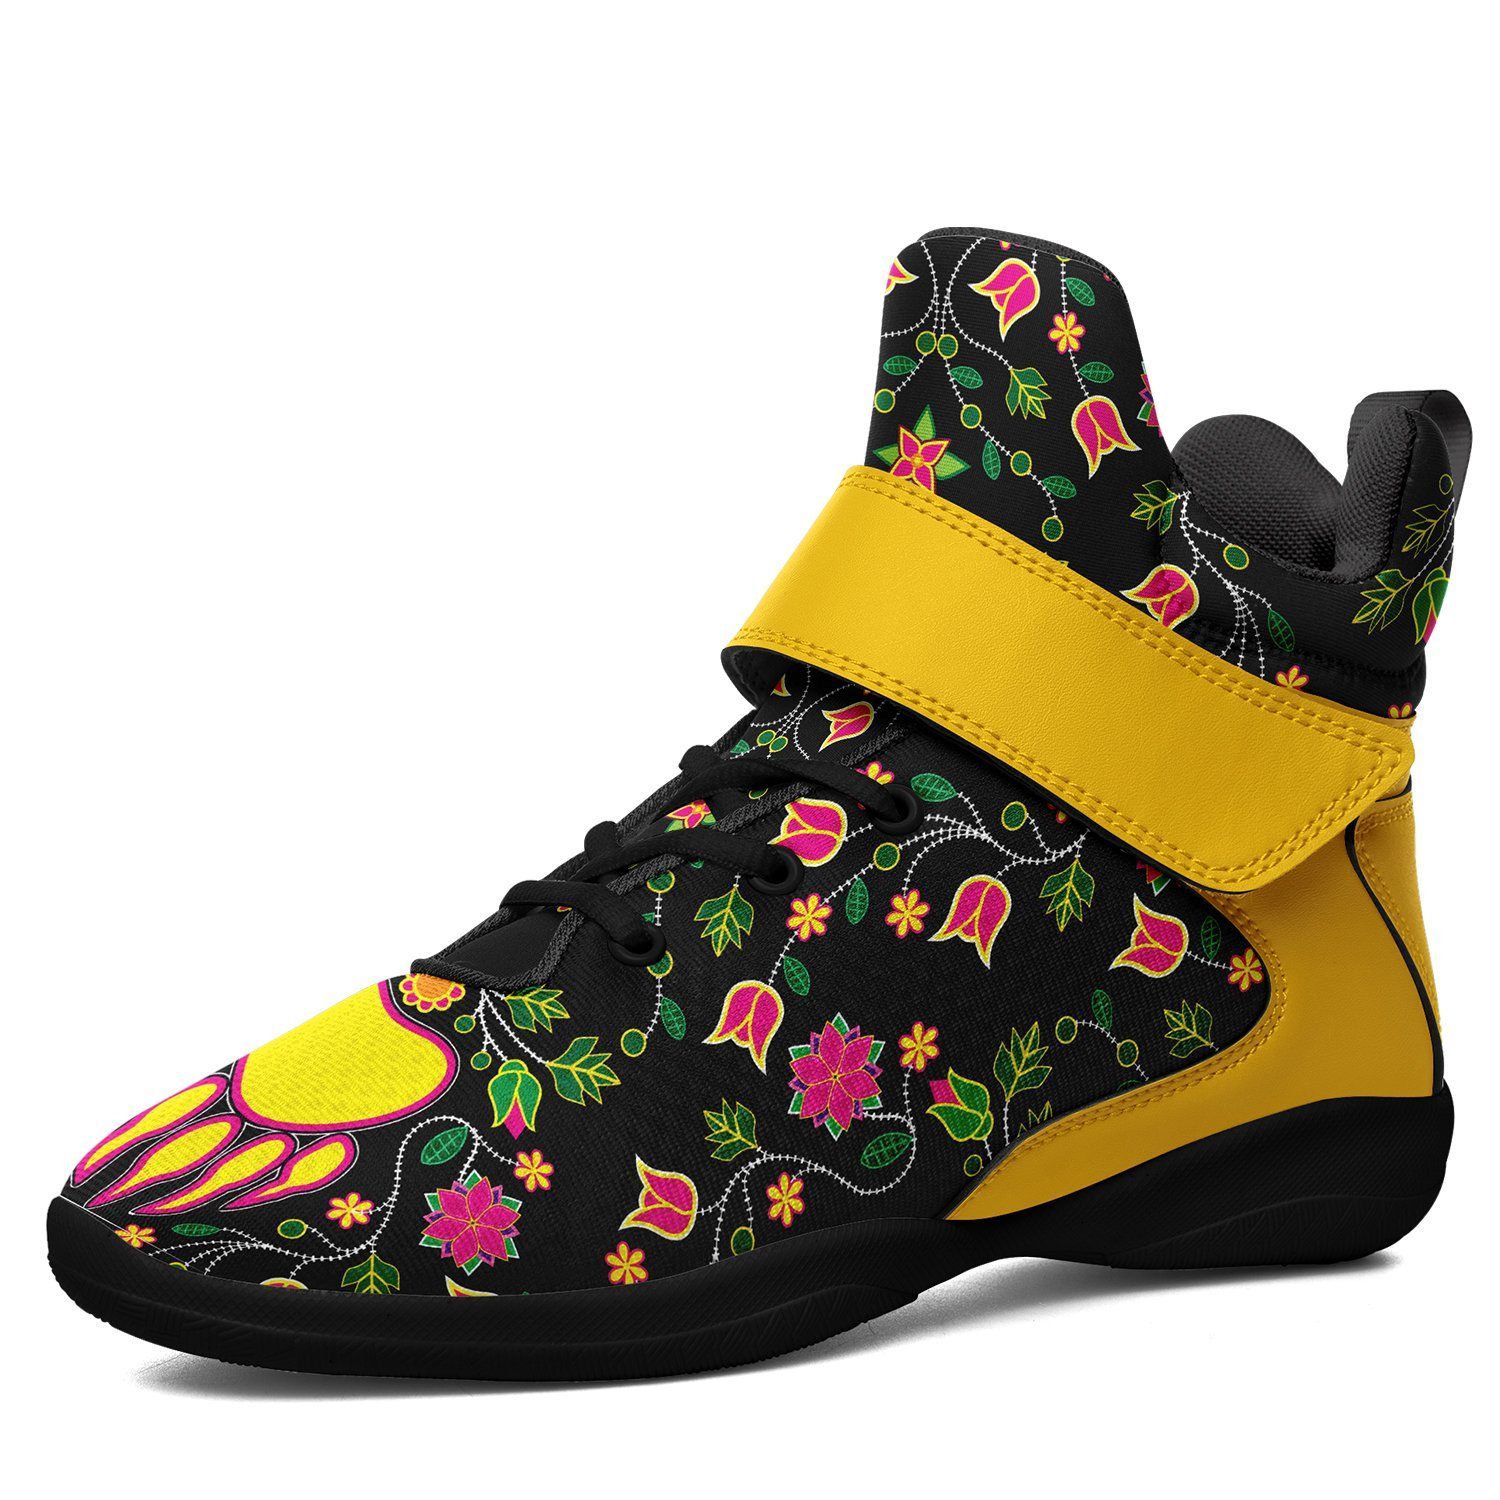 Floral Bearpaw Ipottaa Basketball / Sport High Top Shoes - Black Sole 49 Dzine US Women 8.5 / US Men 7 / EUR 40 Black Sole with Yellow Strap 